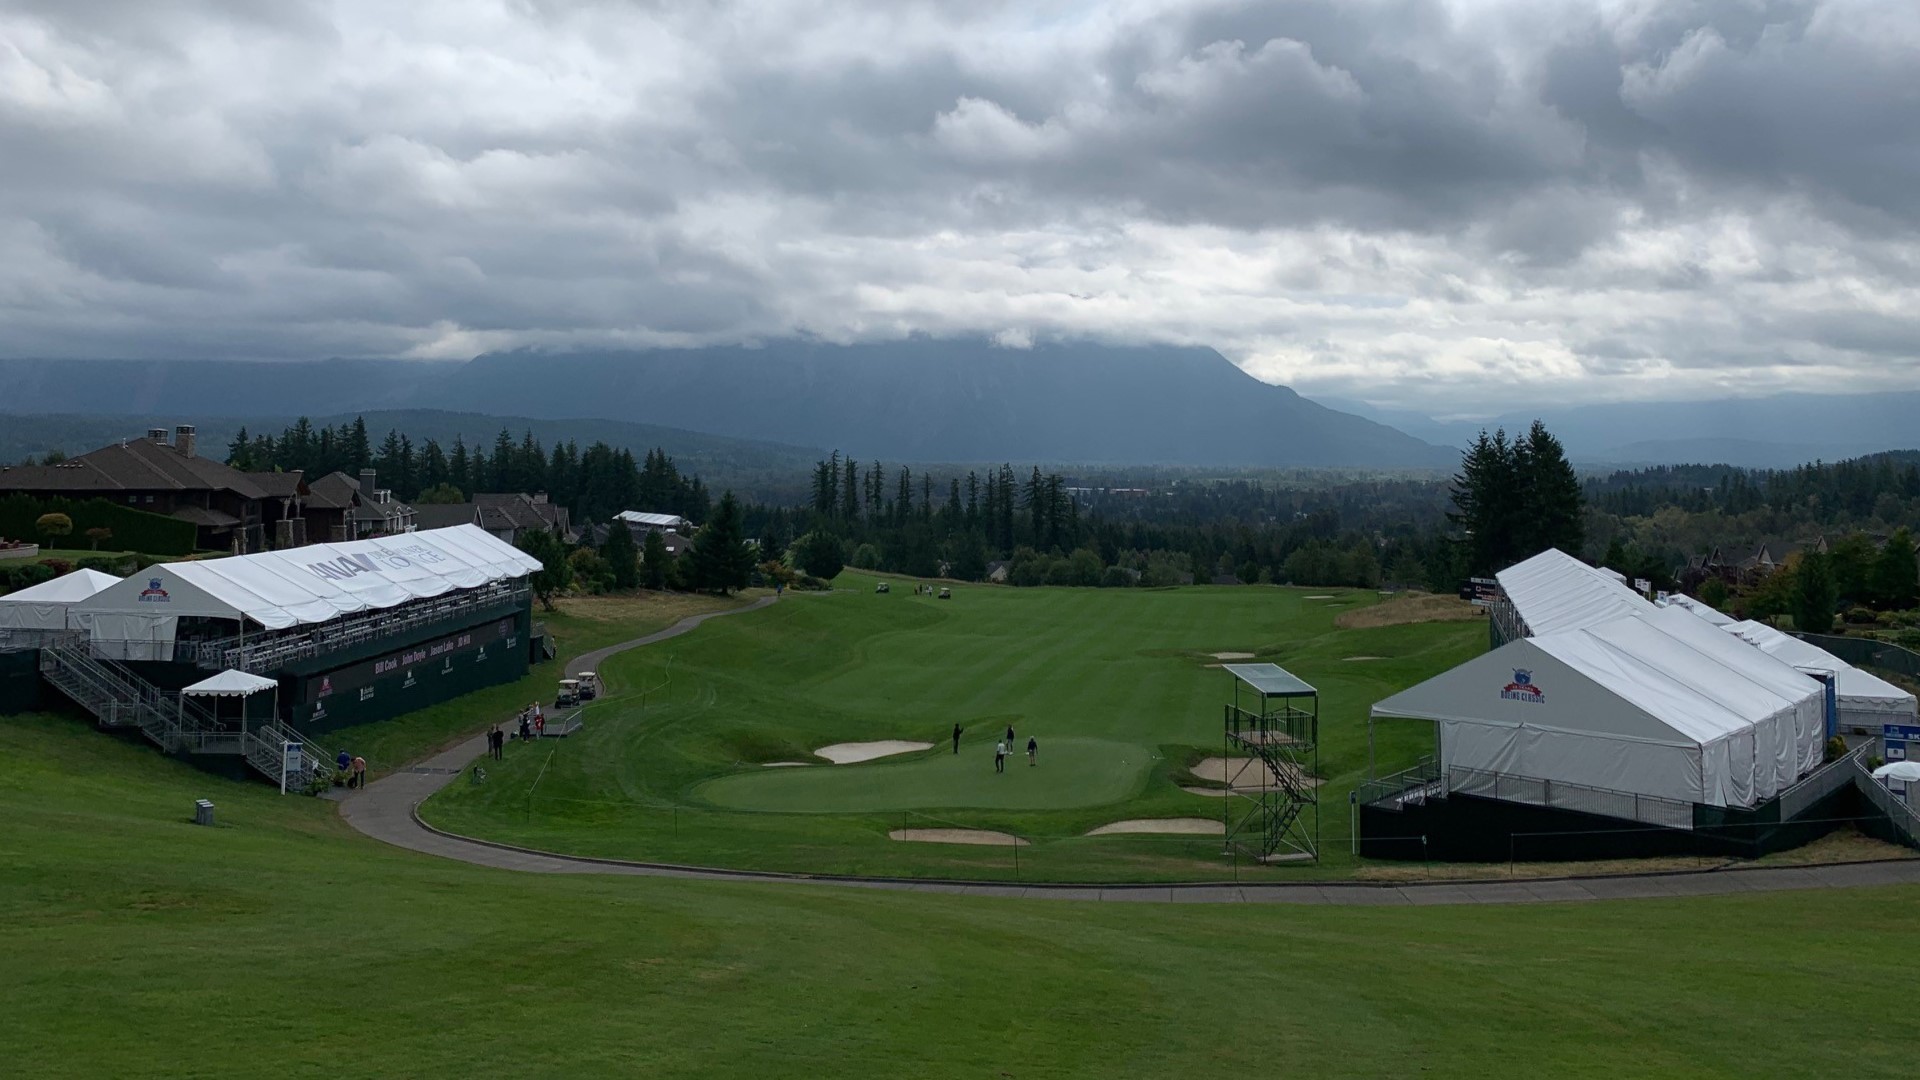 The Boeing Classic at Snoqualmie Ridge features fantastic golfers and lots of fun for the whole family. Sponsored by the Boeing Classic.